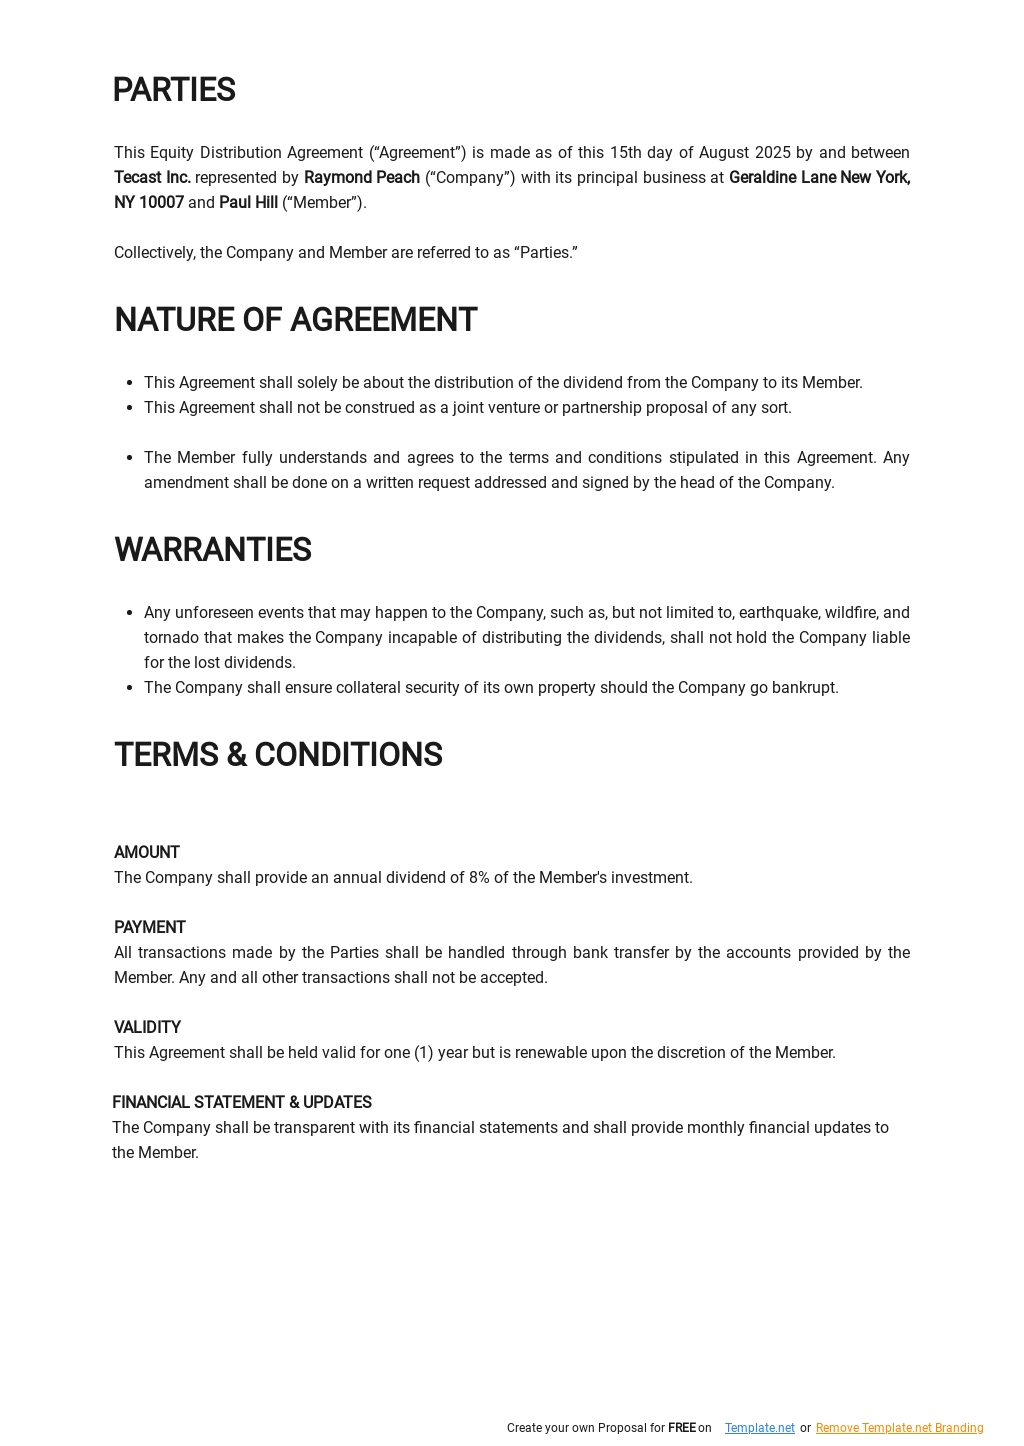 Equity Distribution Agreement Template 1.jpe